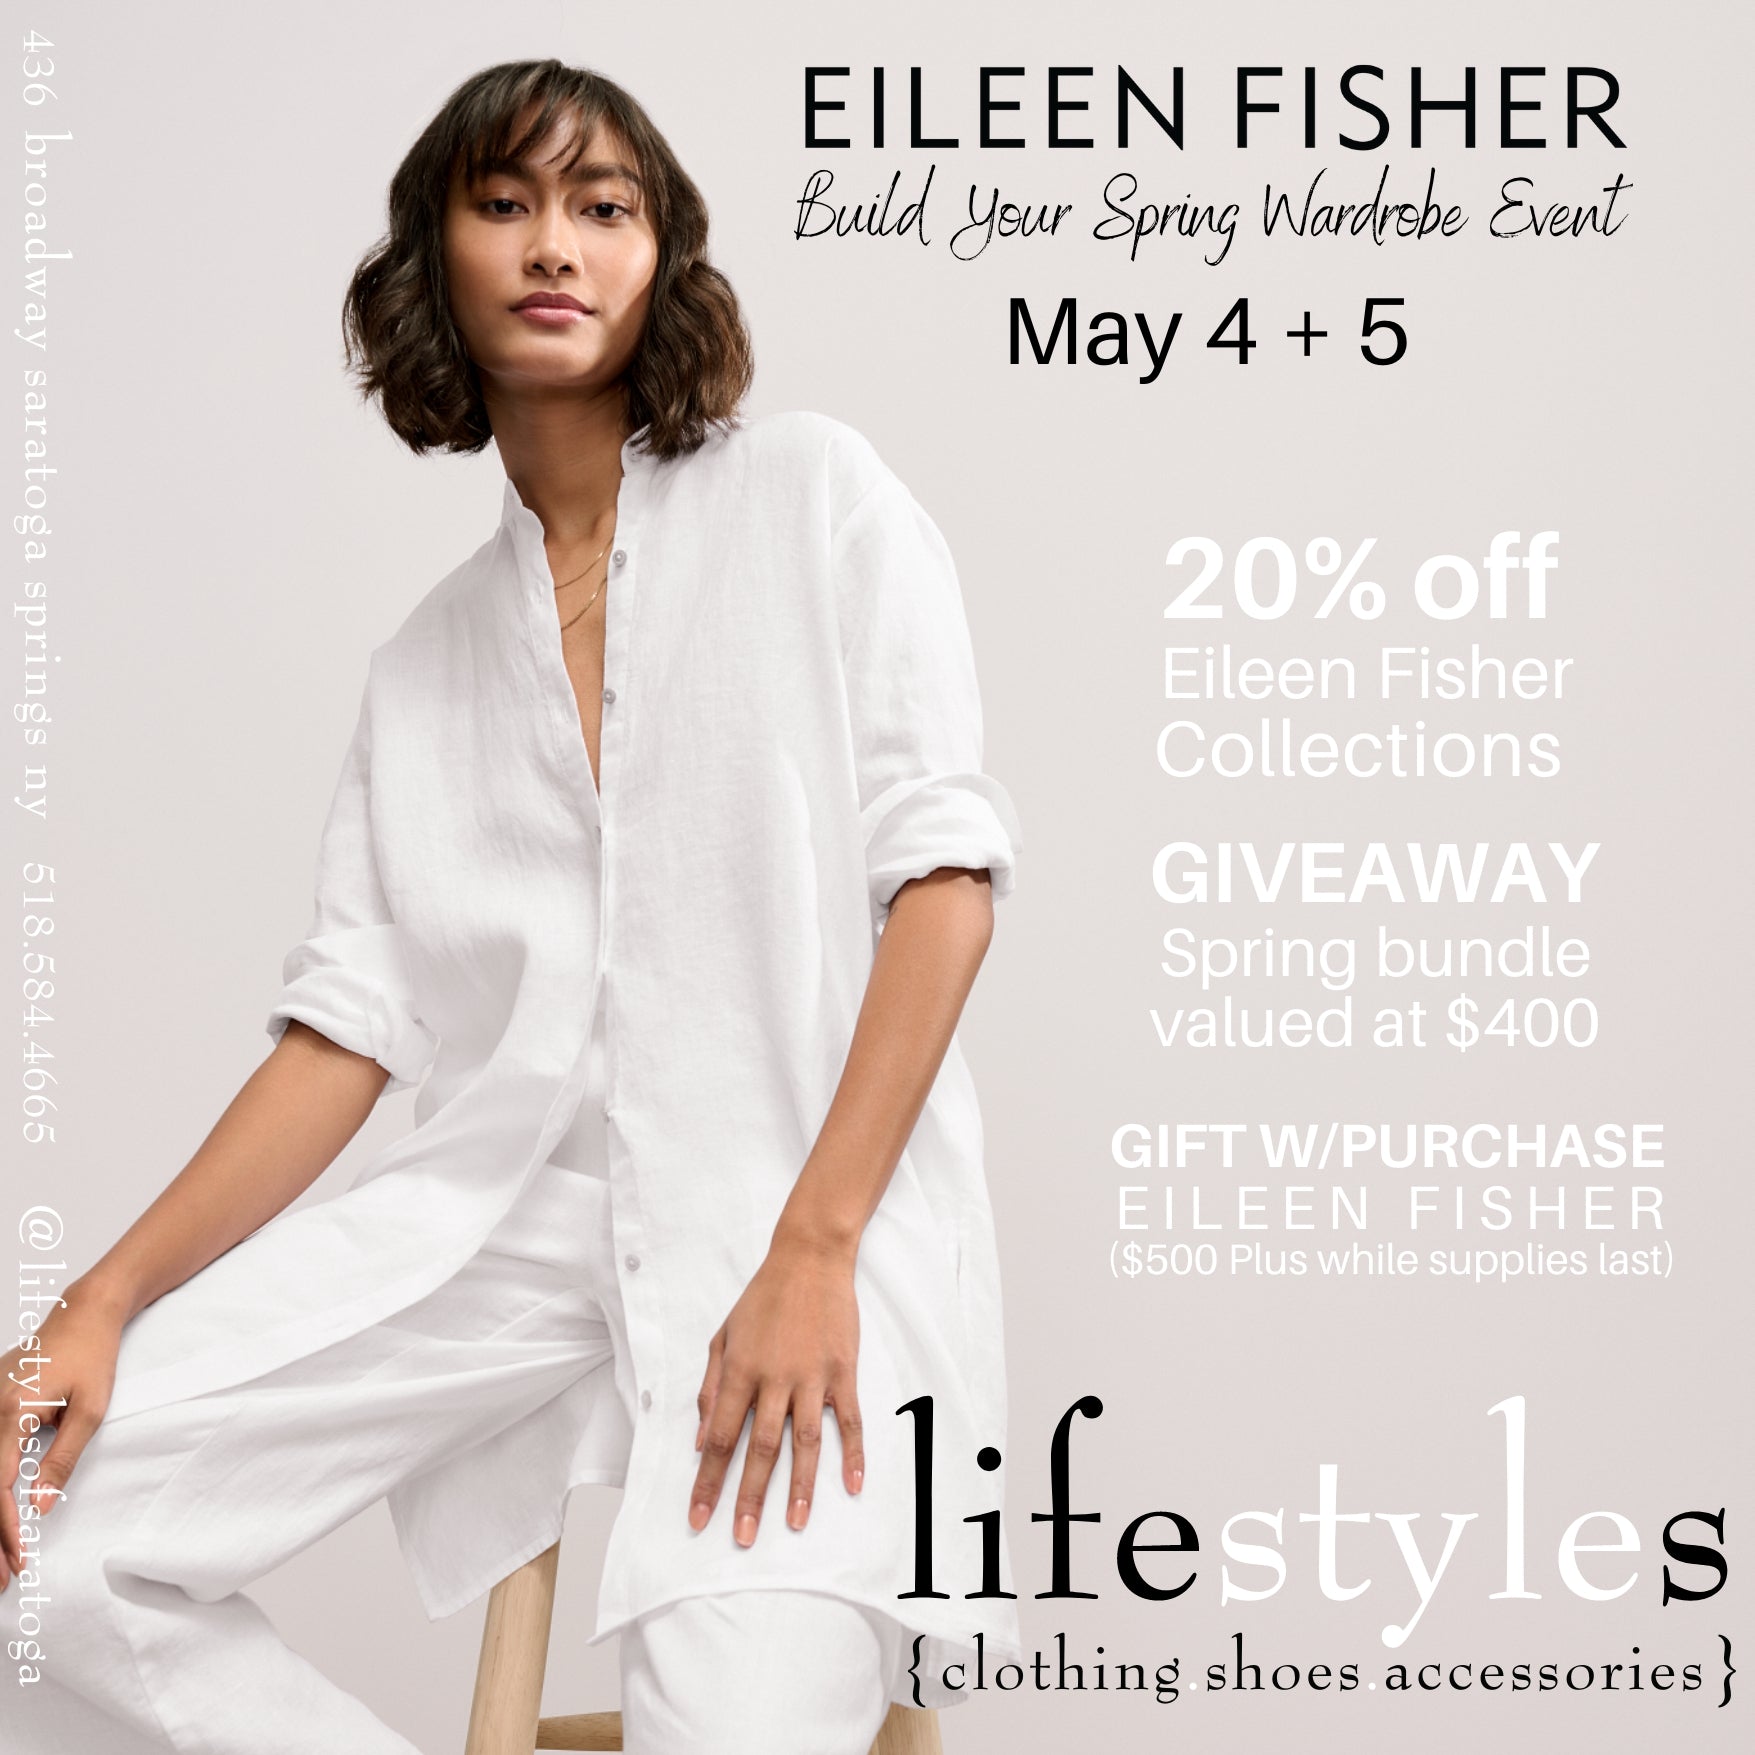 Lifestyles of Saratoga  Eileen Fisher's Build Your Spring